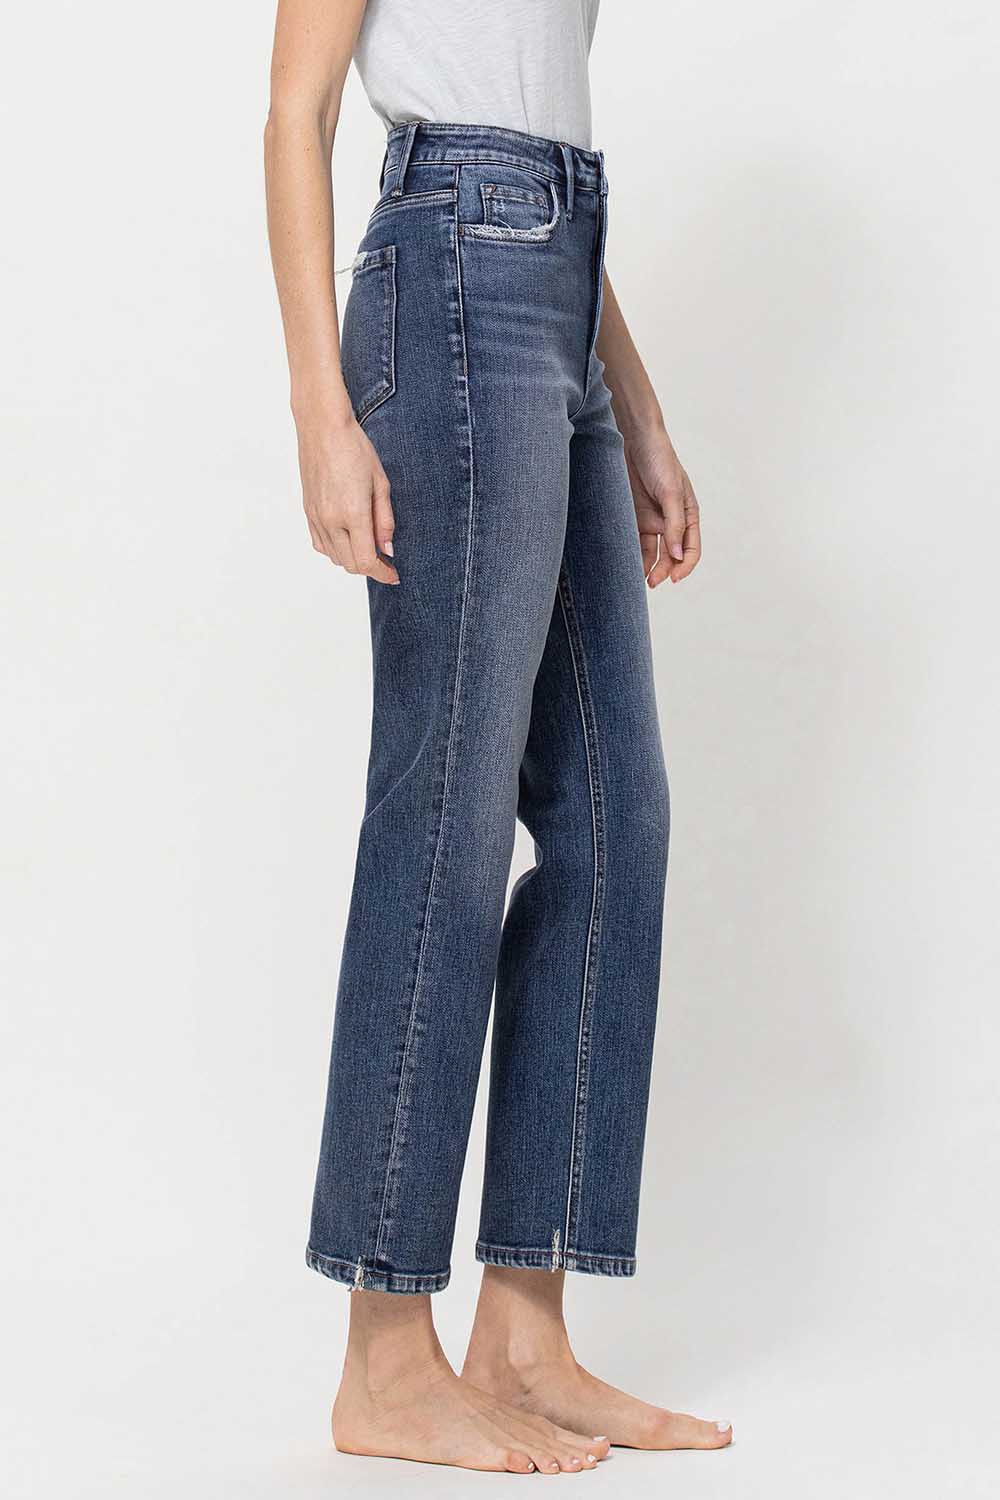 flying-monkey-jeans-high-rise-ankle-straight-jeans-01